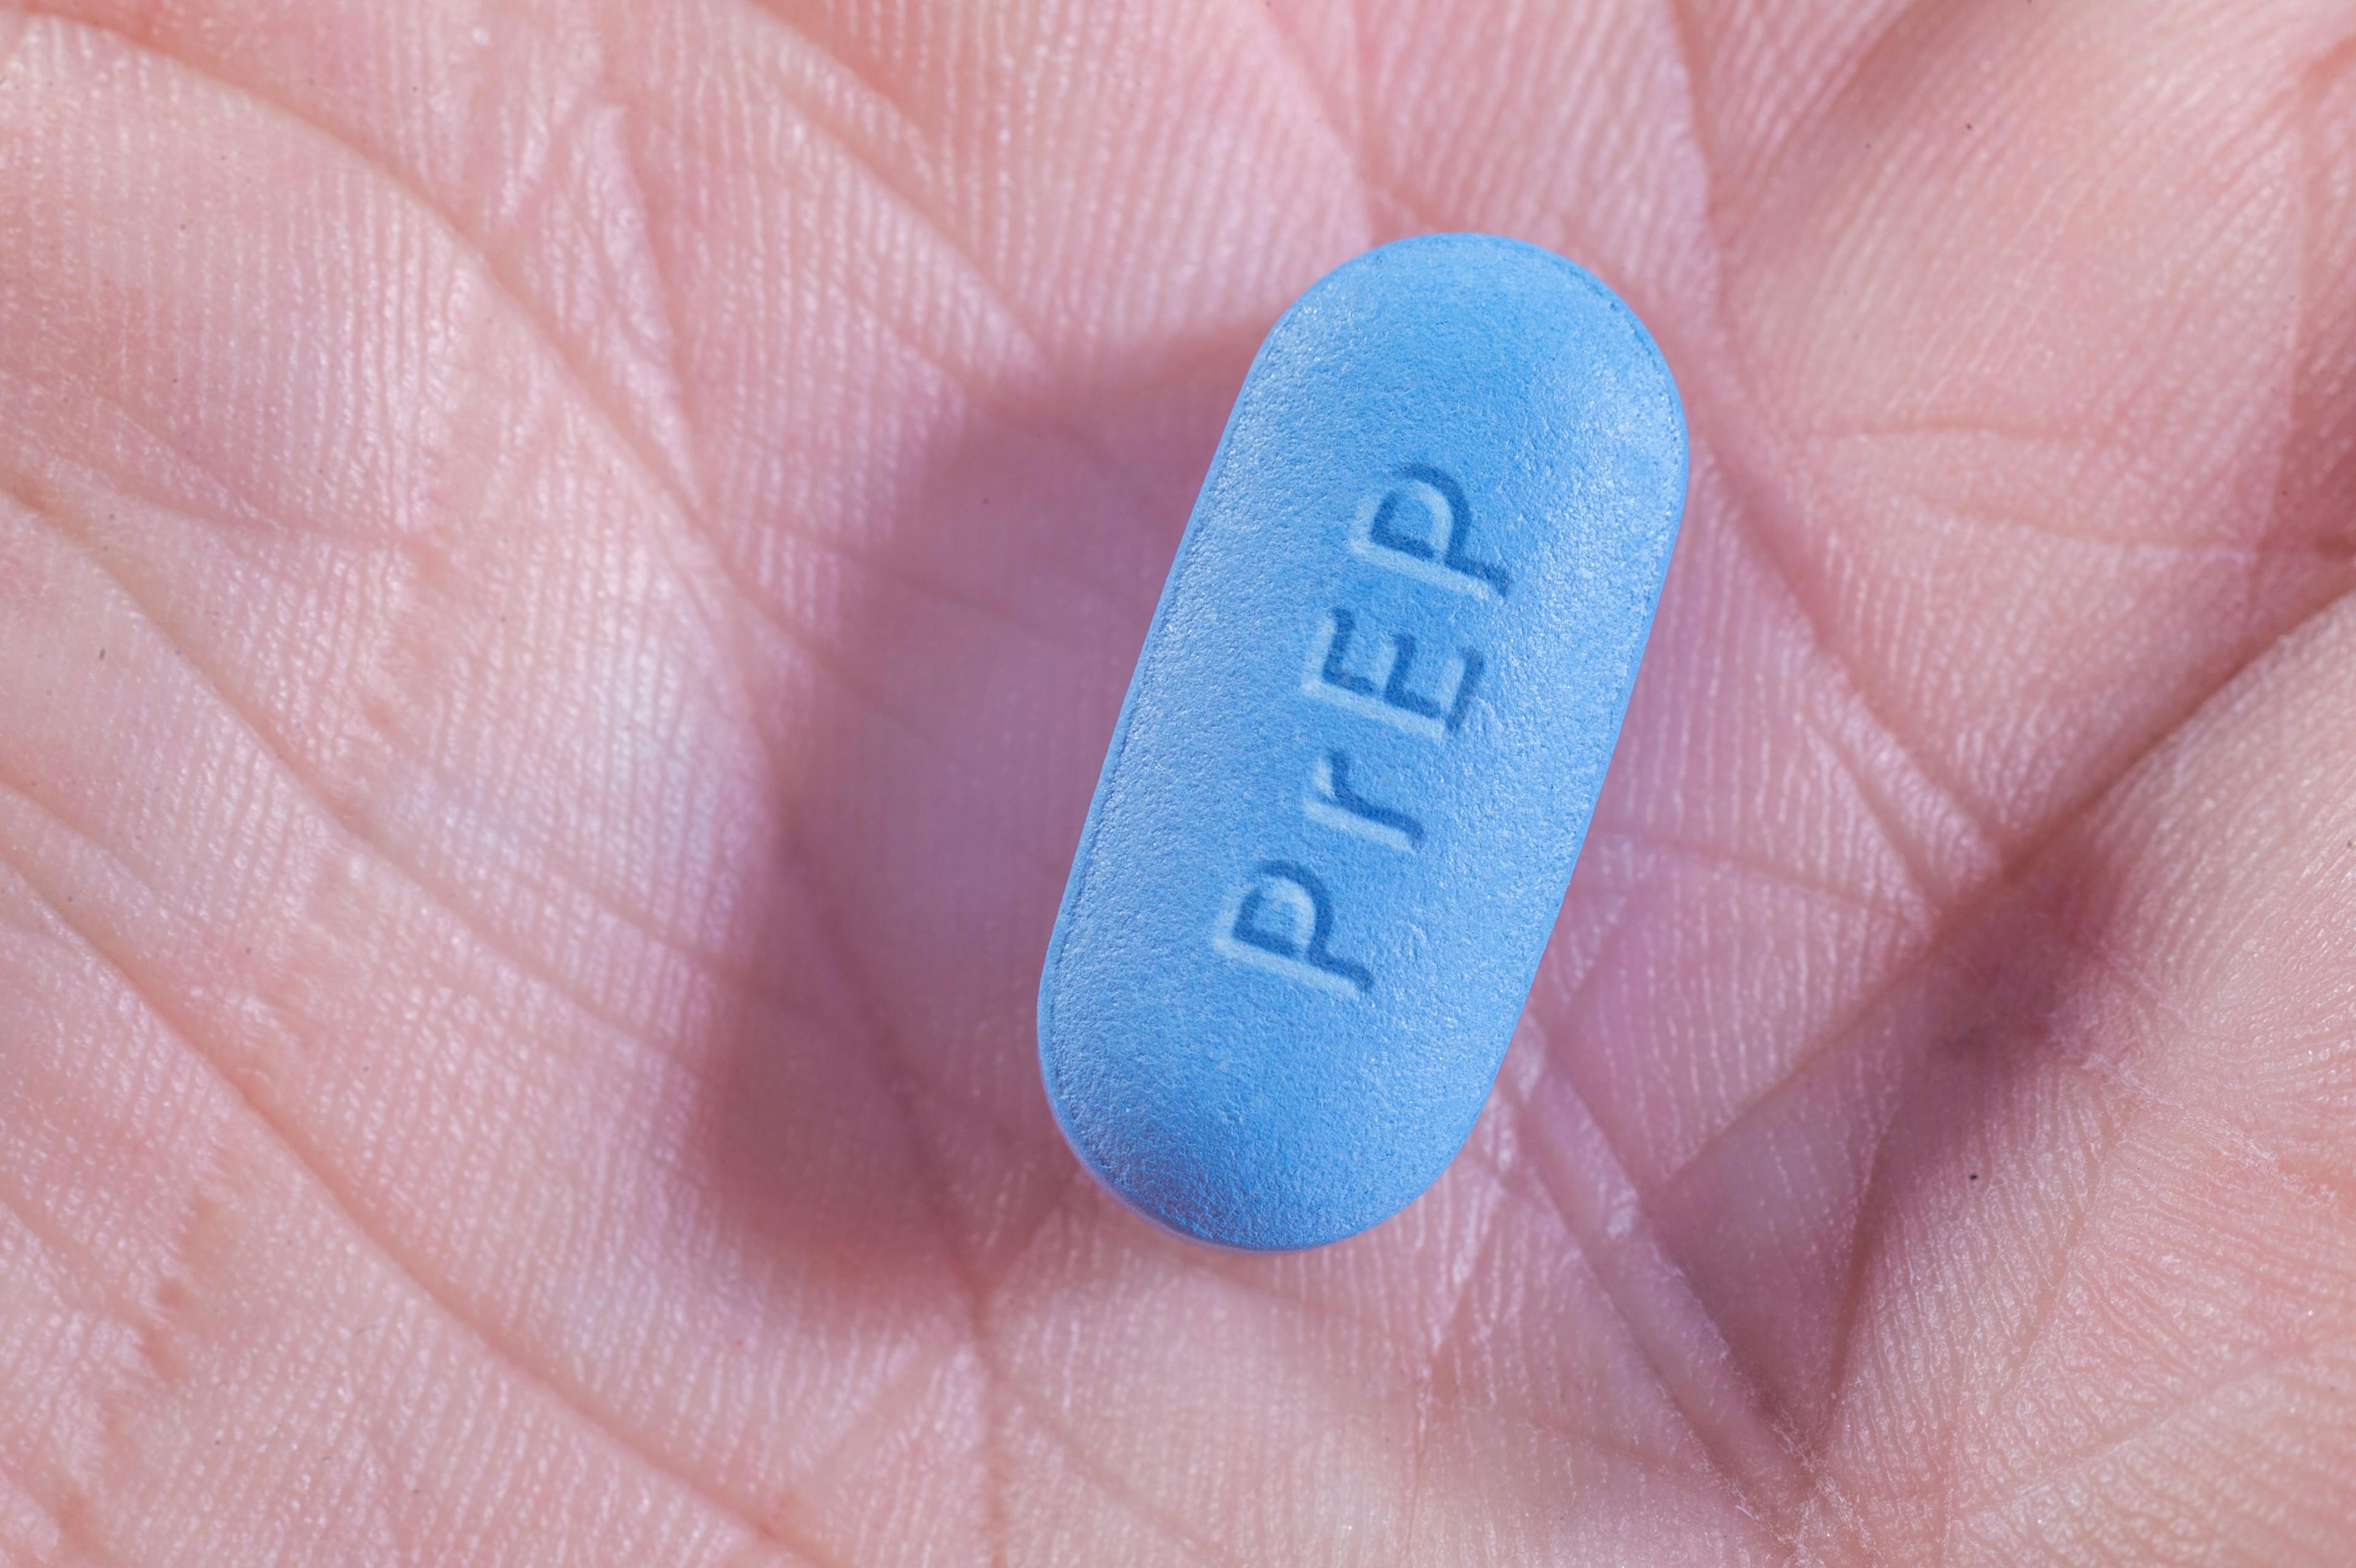 Medication Persistence with PrEP Most Common Among Older, Urban Men